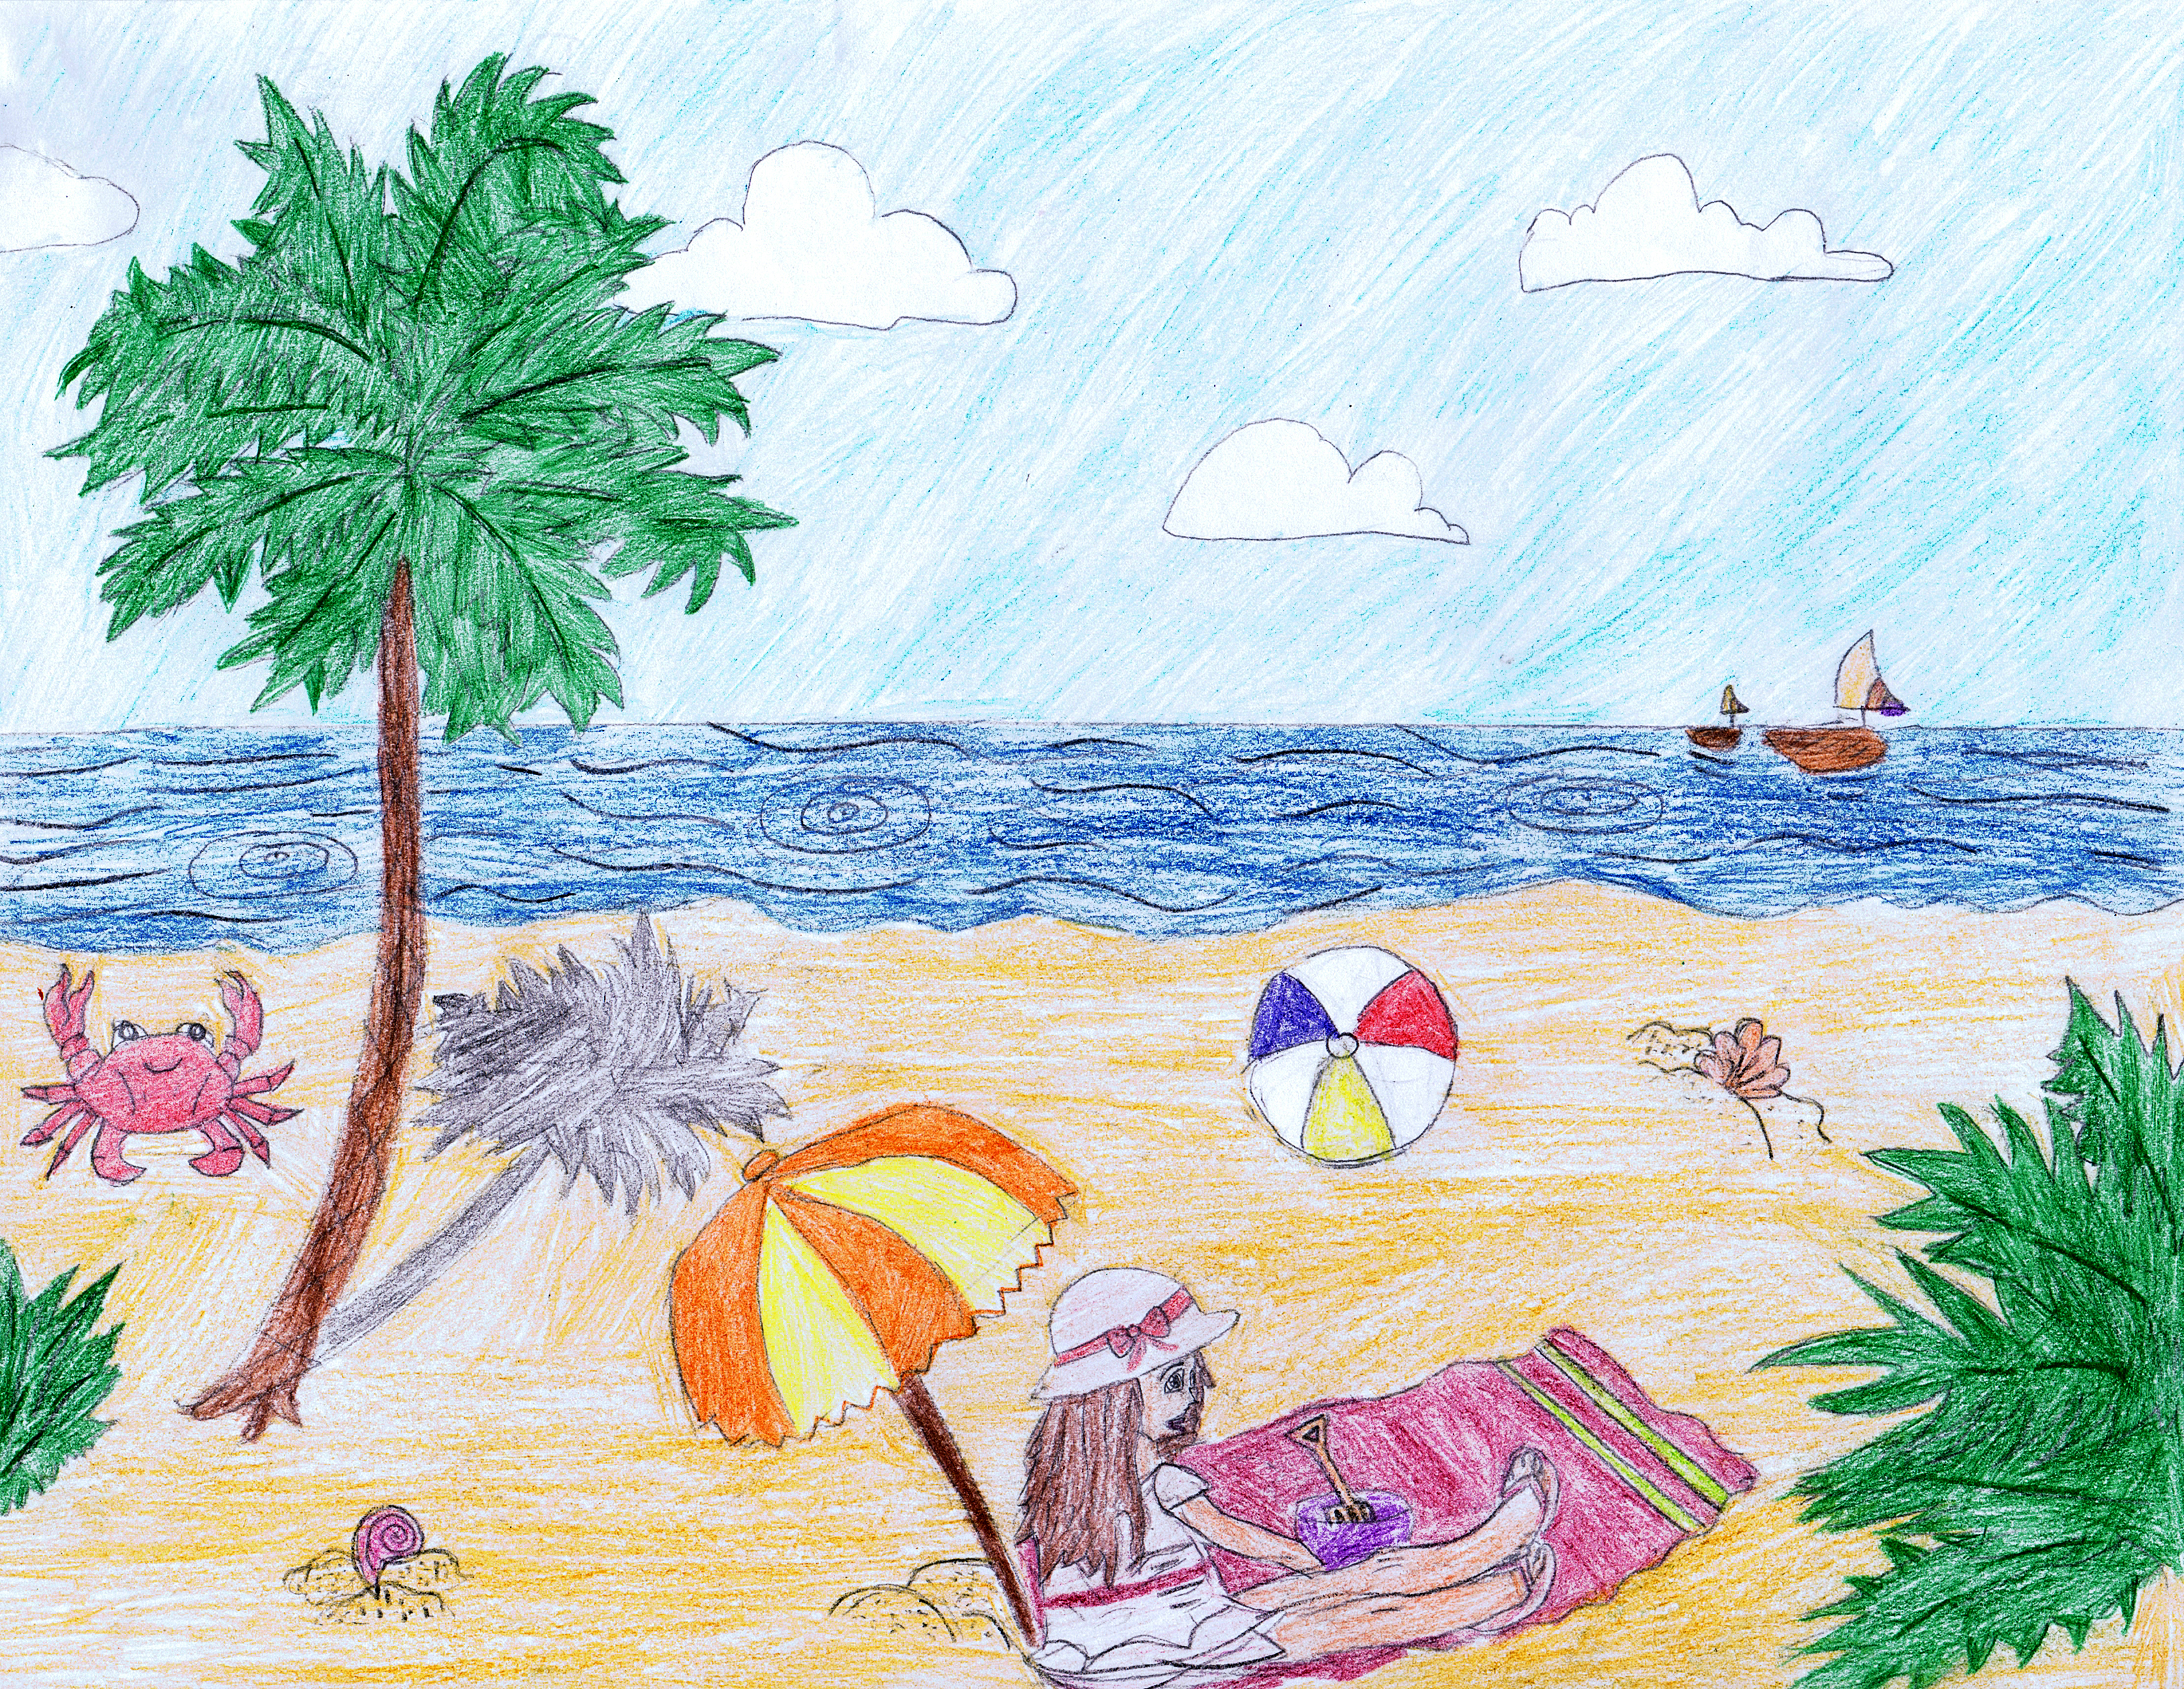 Mediterranean Sea Shore, Majorca Seaside Landscape, Beach, Desert View,  Five-Year-Old Child Art, Nursery Decor, Wax Crayons Kid Drawings, Toddler  Pencil Drawing, Mother and Daughter Child's Artwork